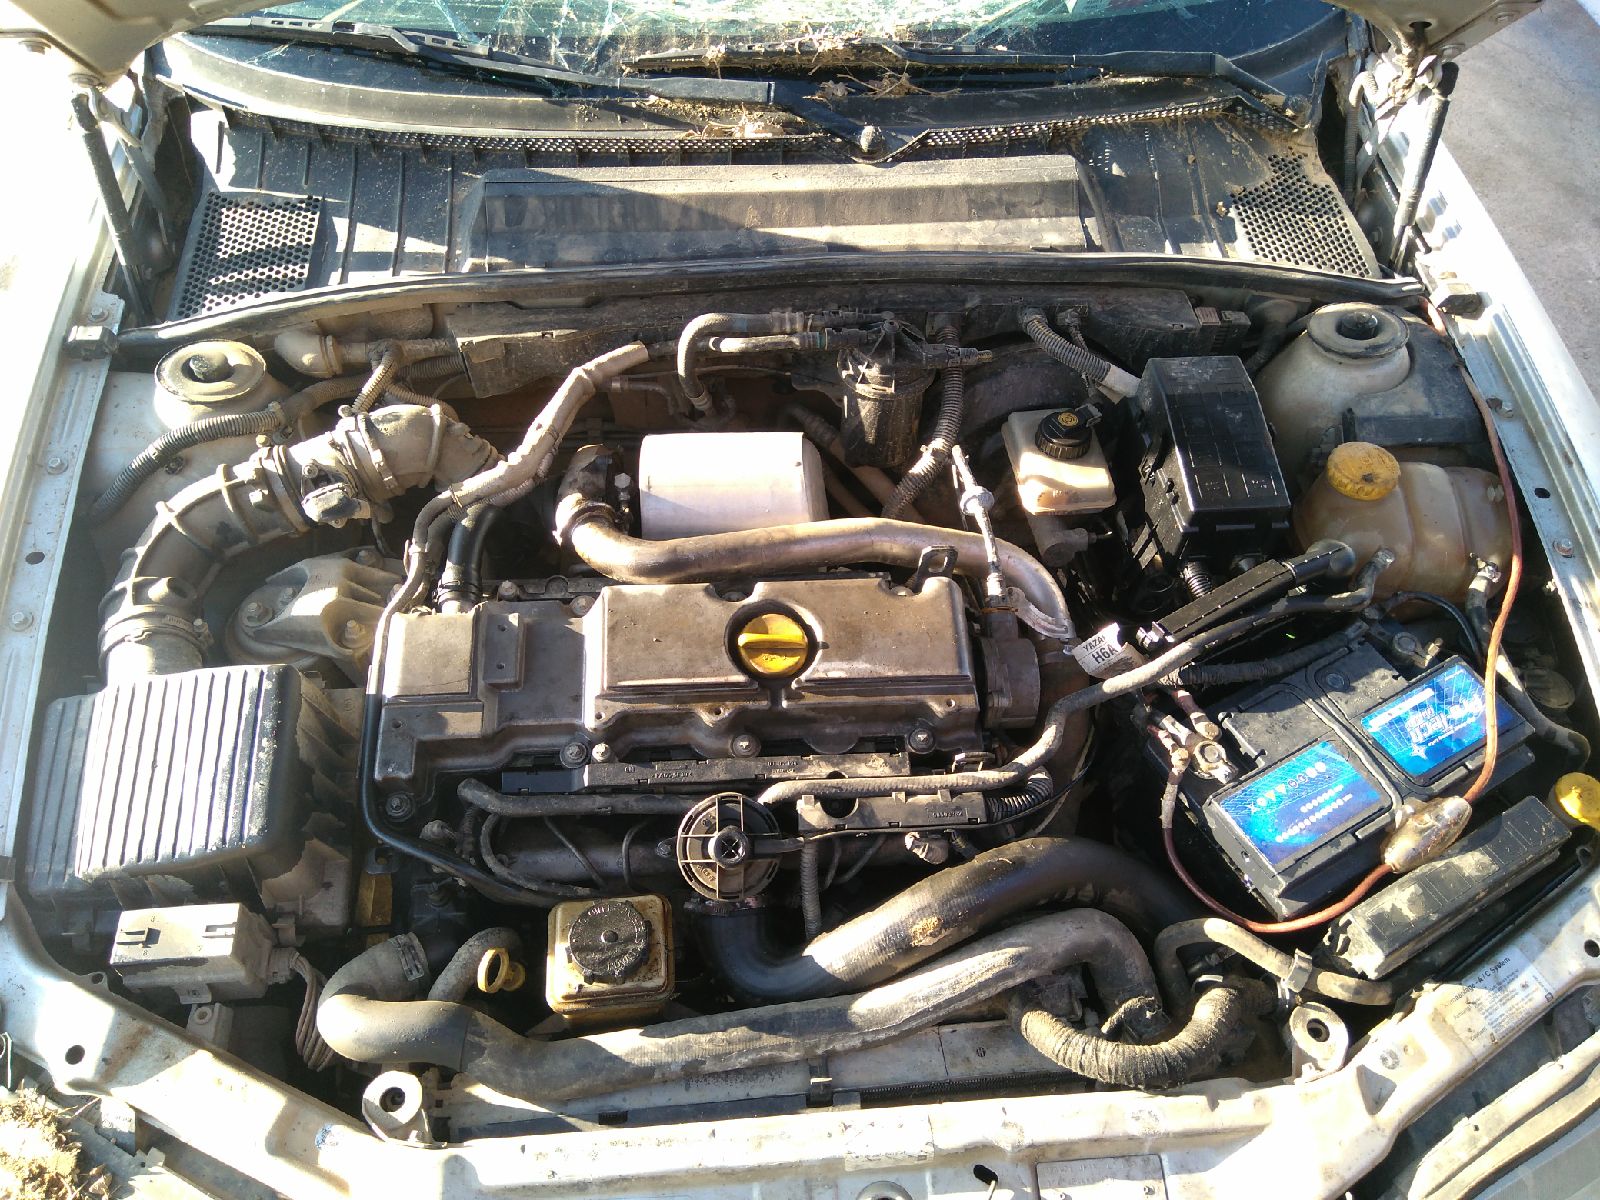 OPEL Vectra B (1995-1999) Other Engine Compartment Parts 09158995, Y20DTH, BARILLANIVELDEACEITE 24681528